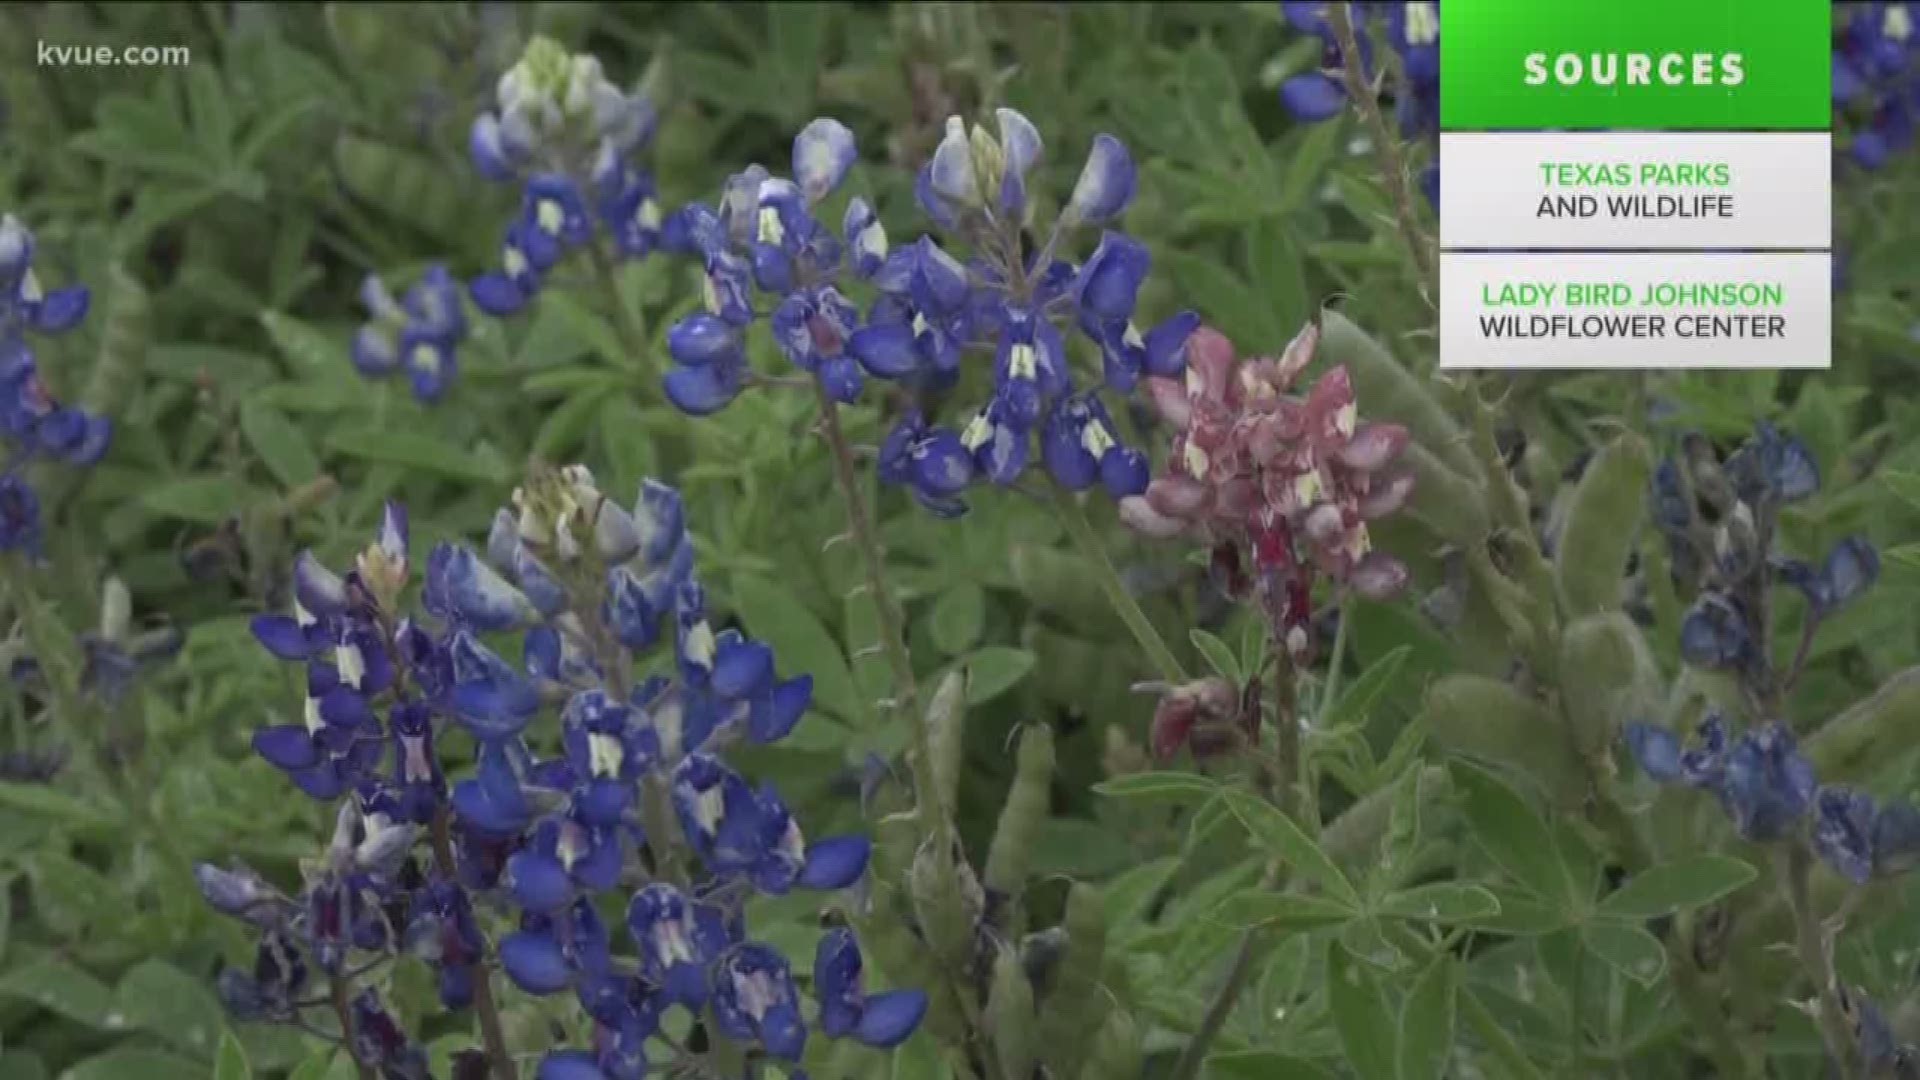 Is it really illegal to walk over bluebonnets? KVUE looked into it.